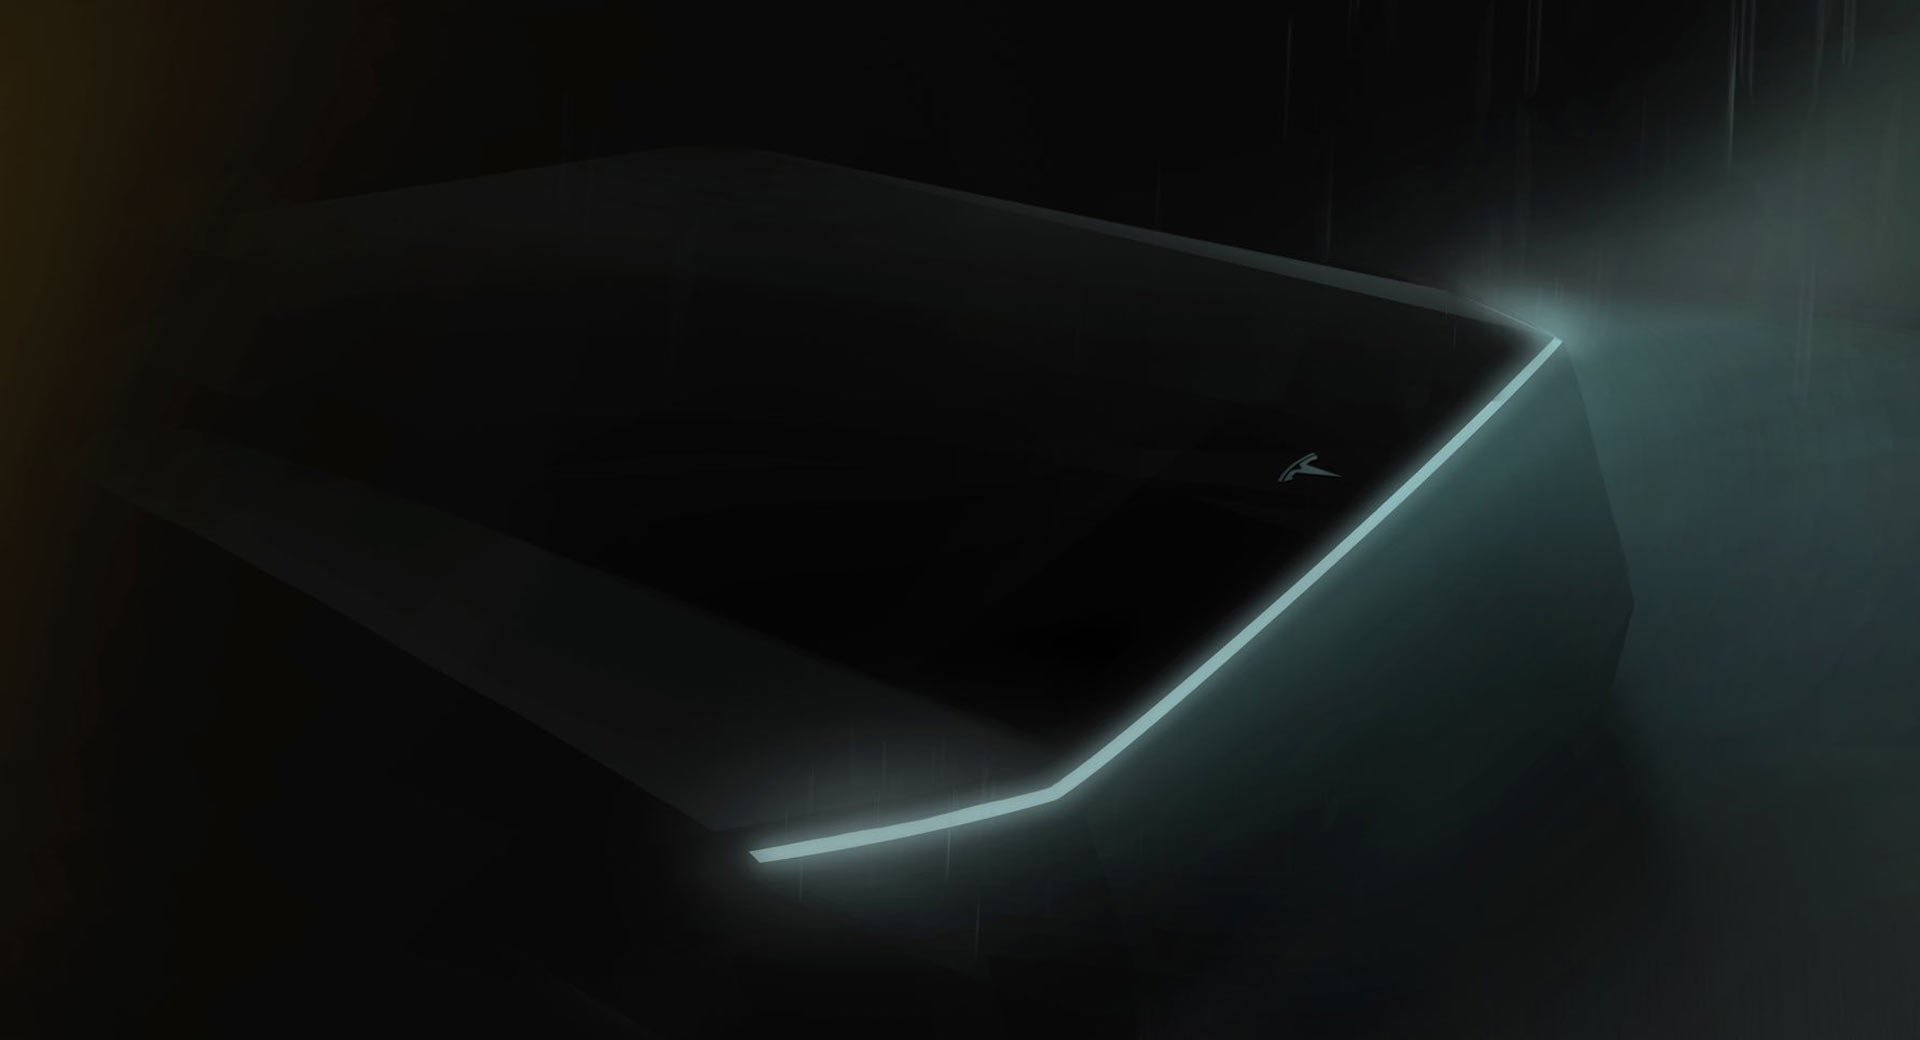 Musk Says Tesla Pickup Will Be Like A Futuristic “Armored Personnel Carrier”